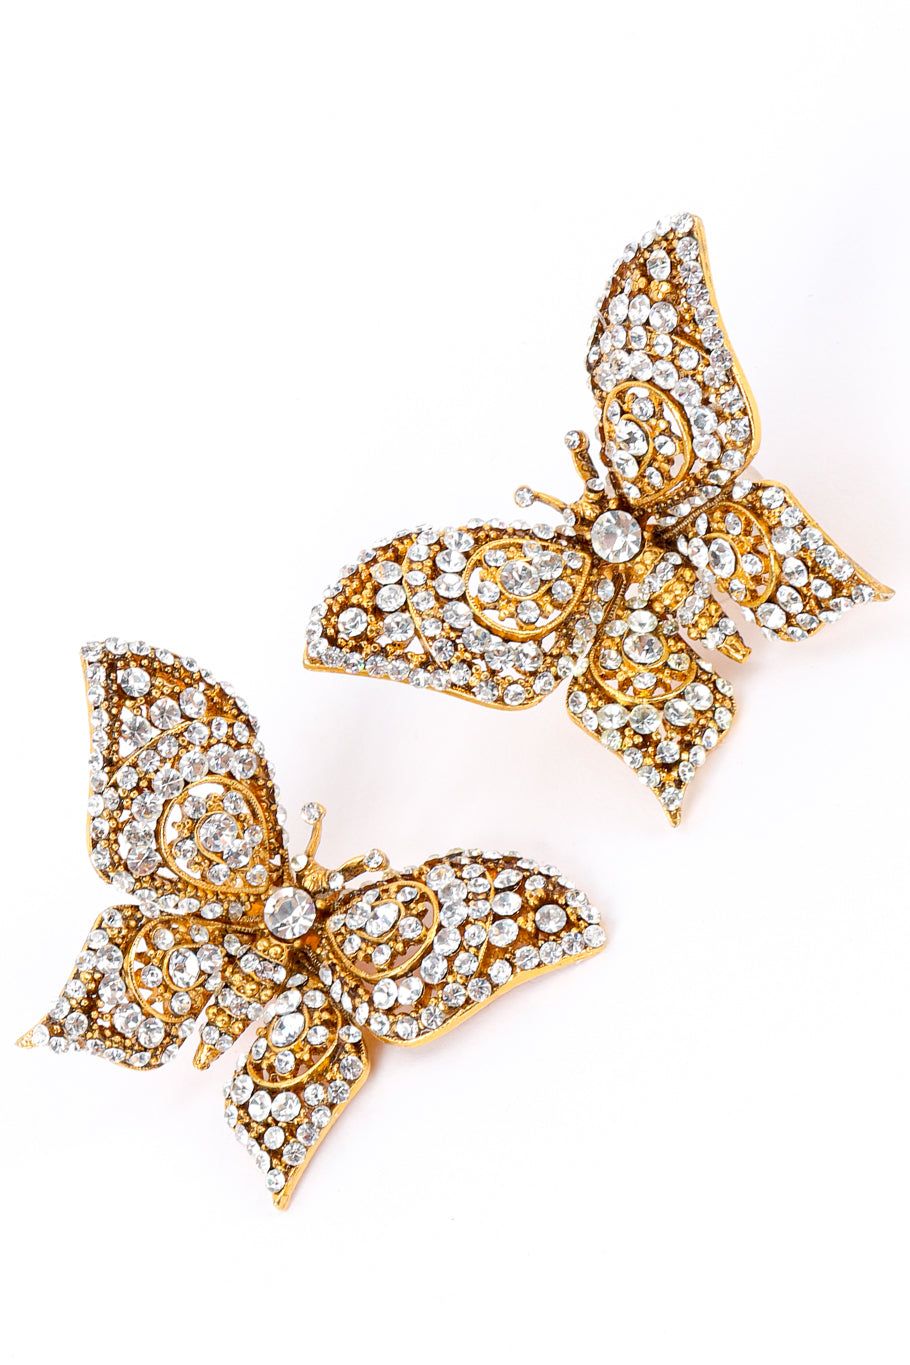 Vintage Crystal Butterly Earrings front view on white backdrop @Recessla